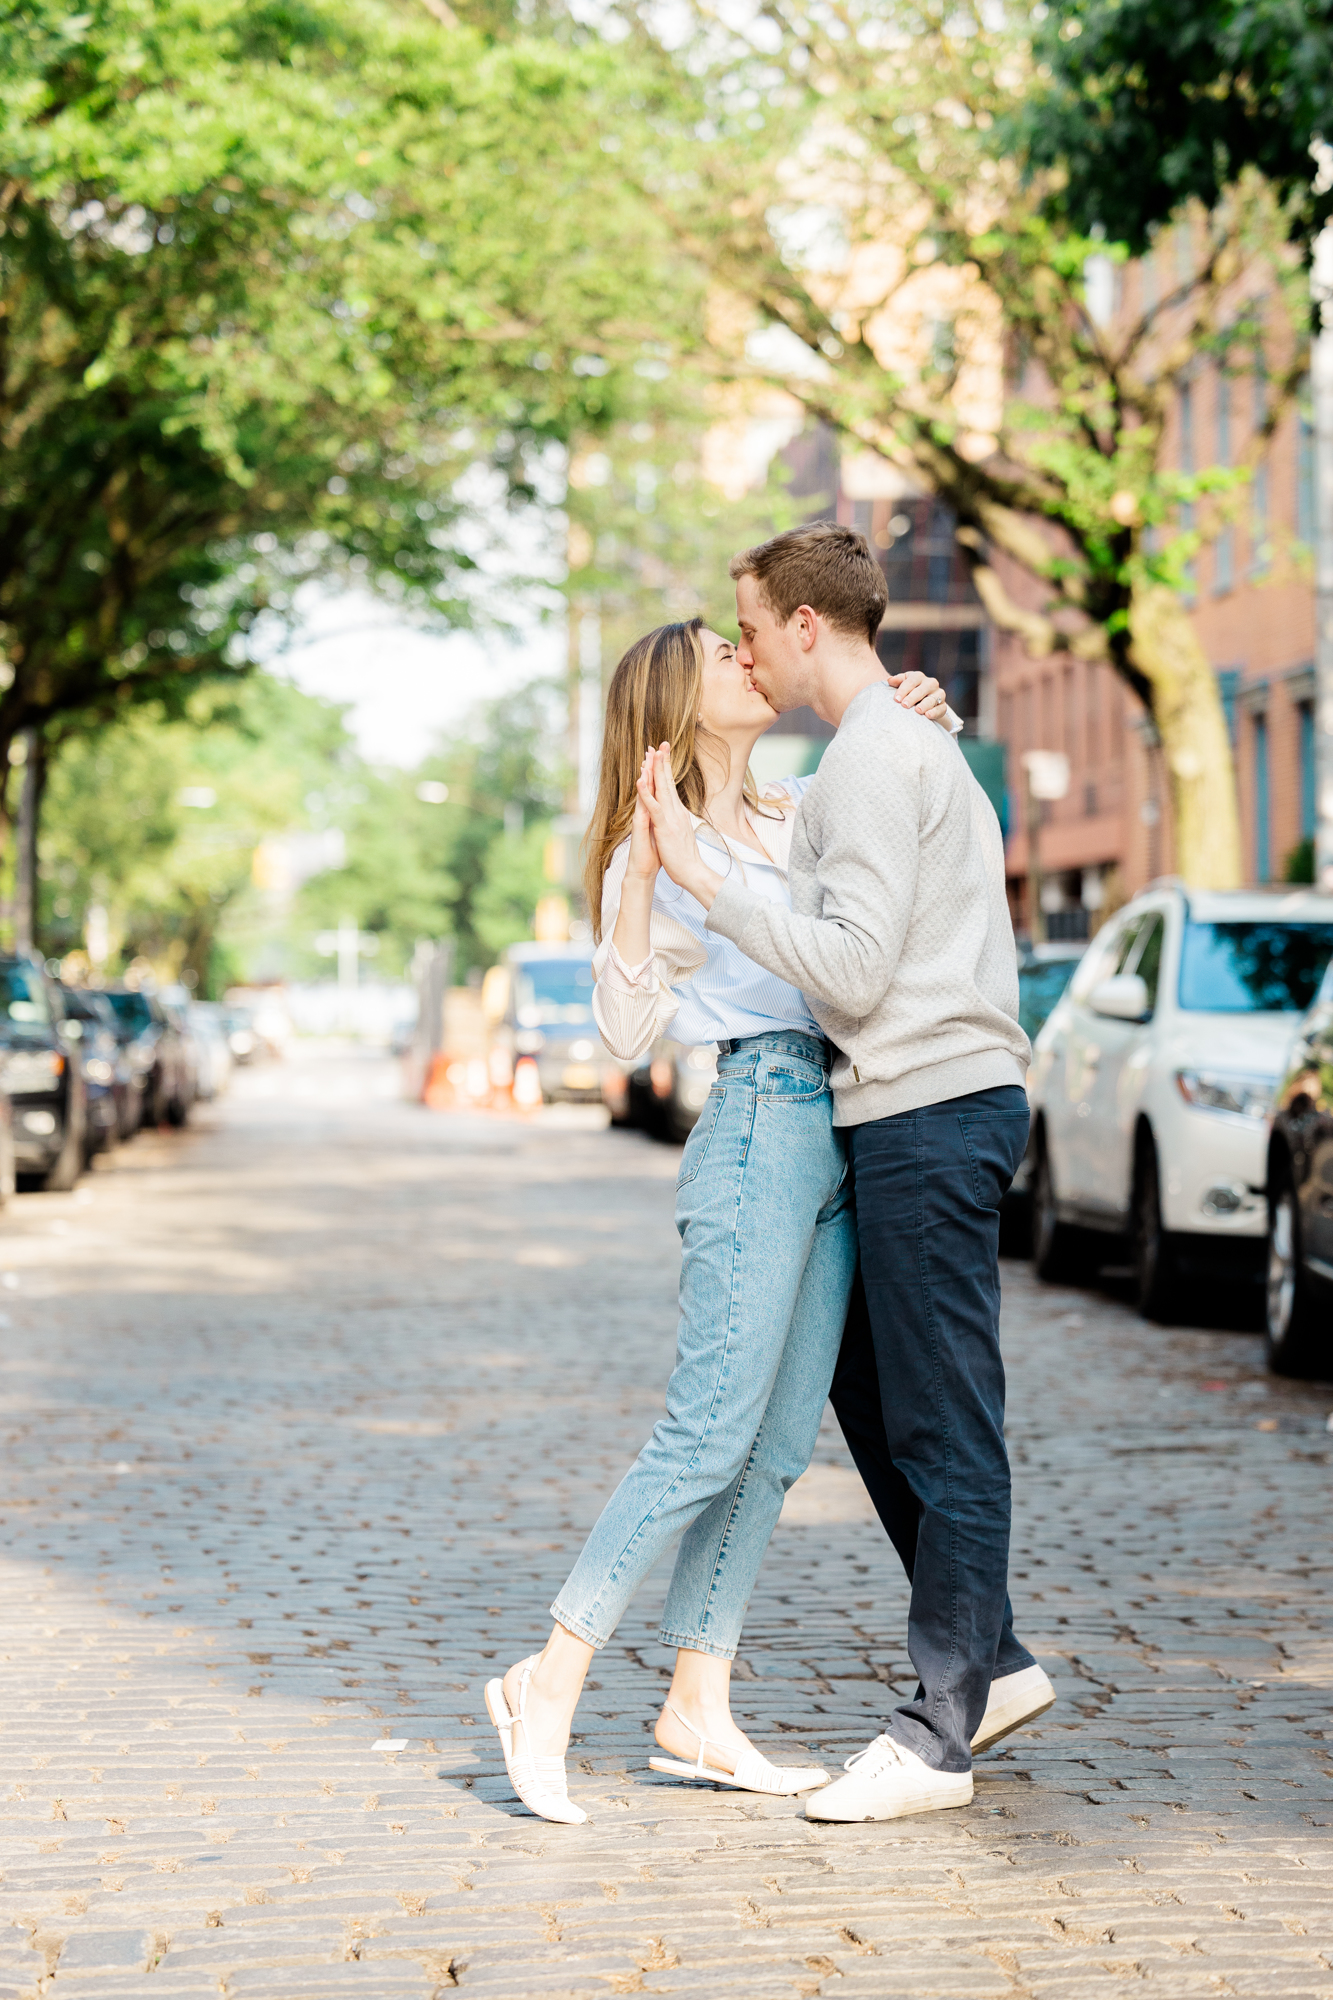 Sweet Summer Engagement Photography in the West Village